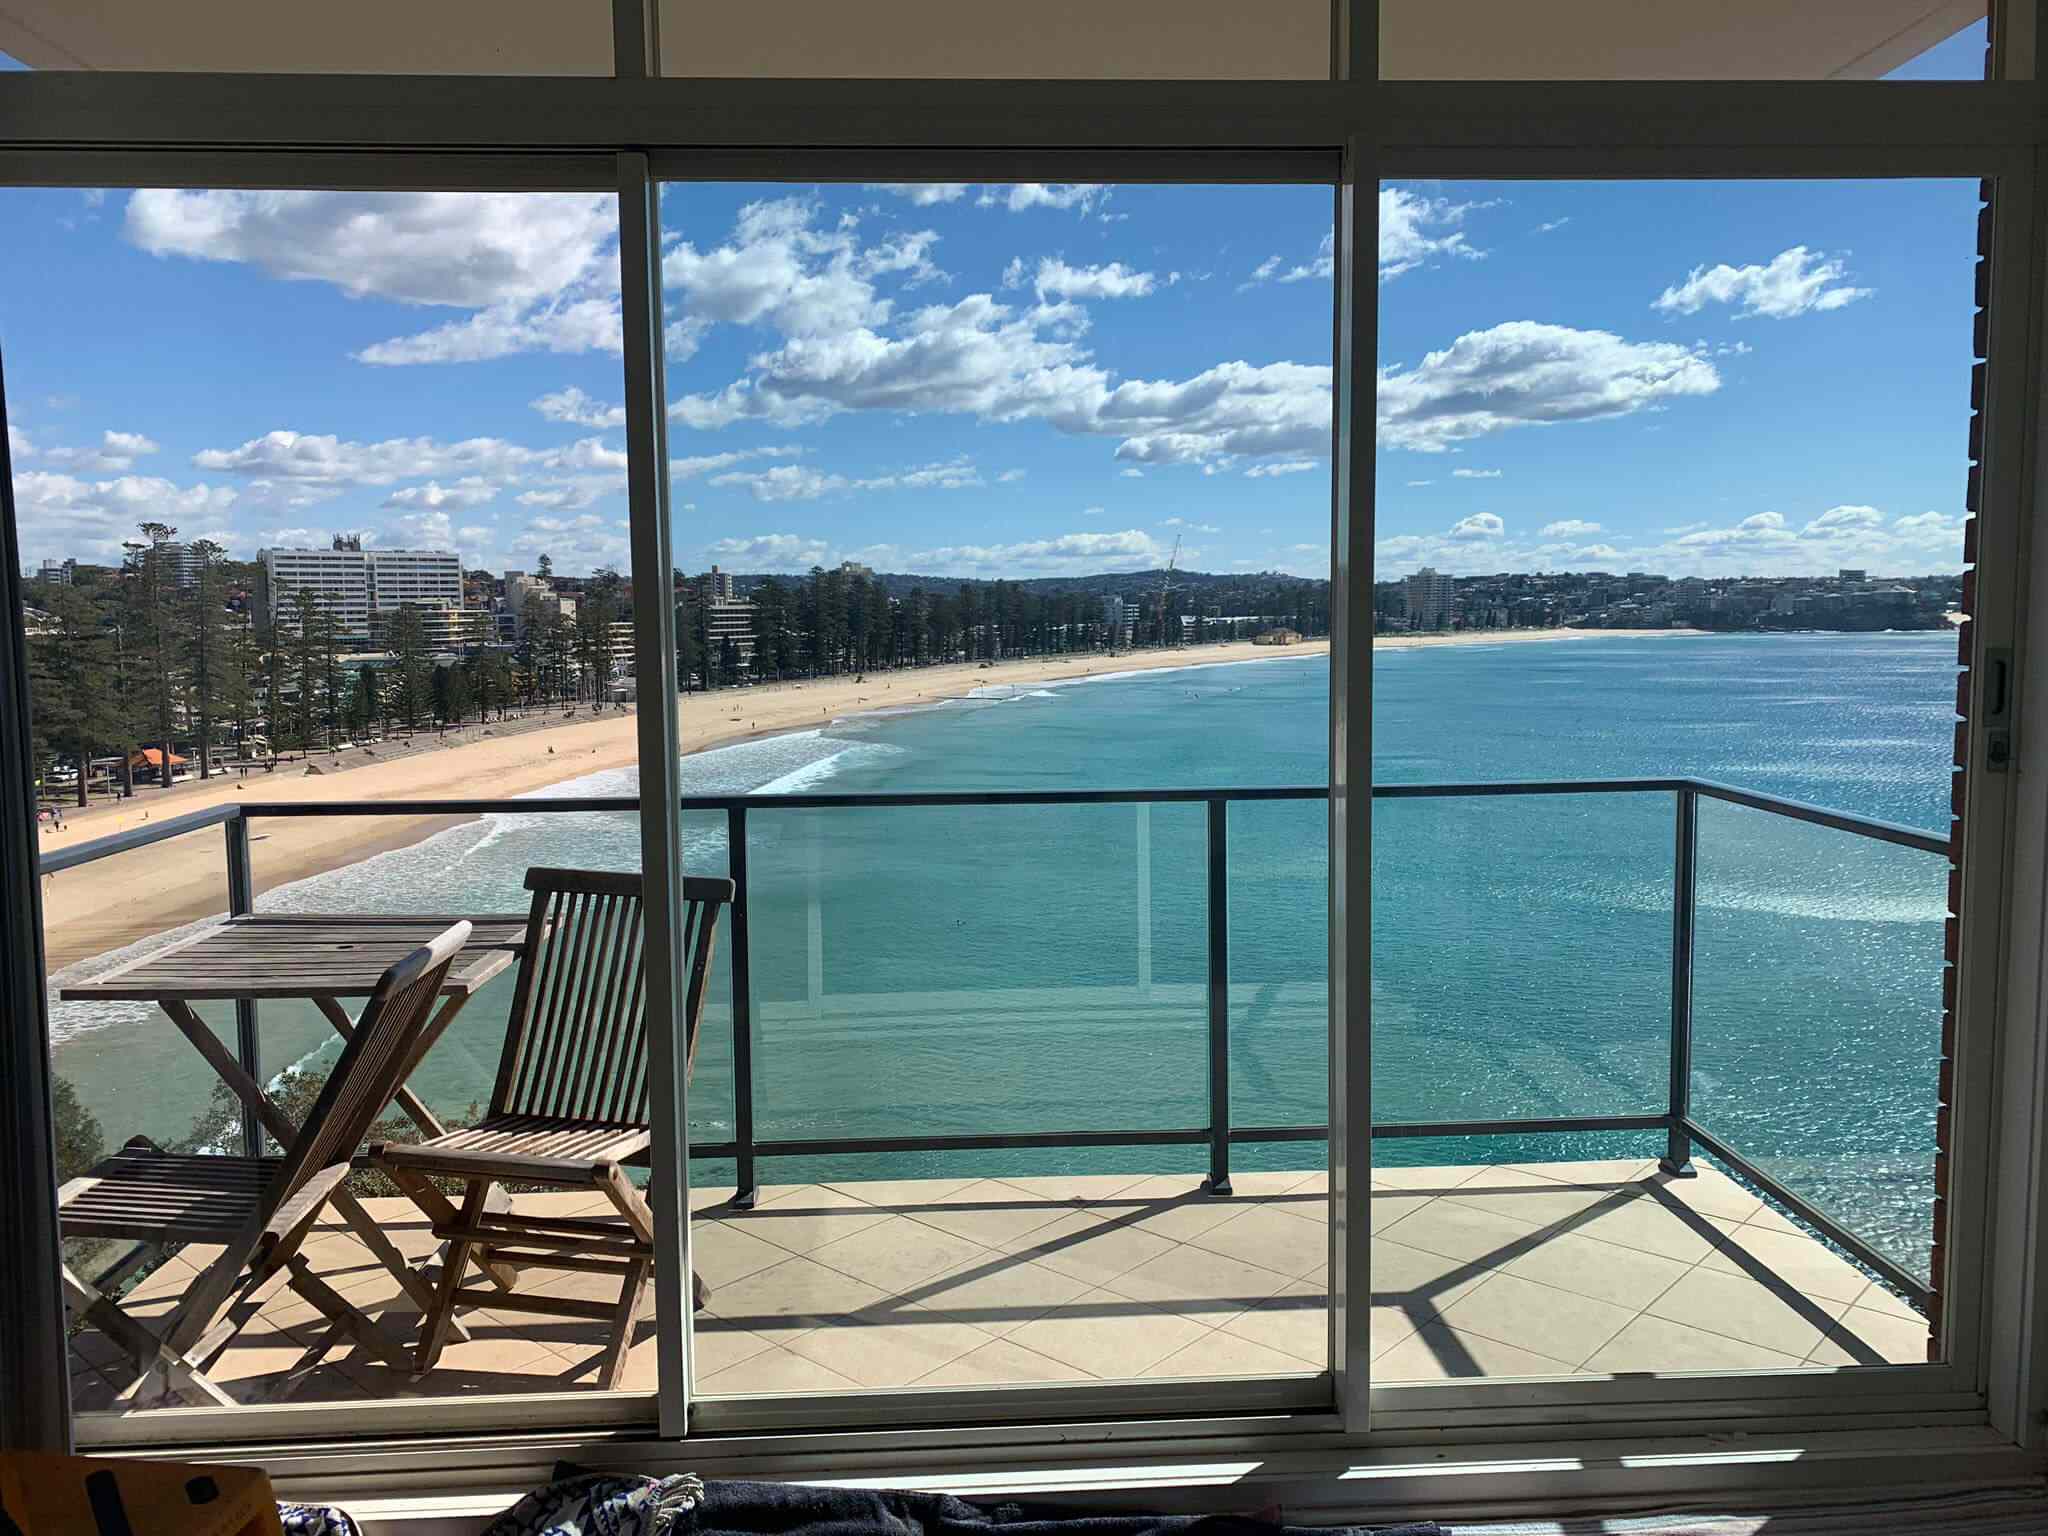 Residential Window Tinting - Solar Window Film - Solar Gard ULR 80 - Manly - TintFX - left panel without film